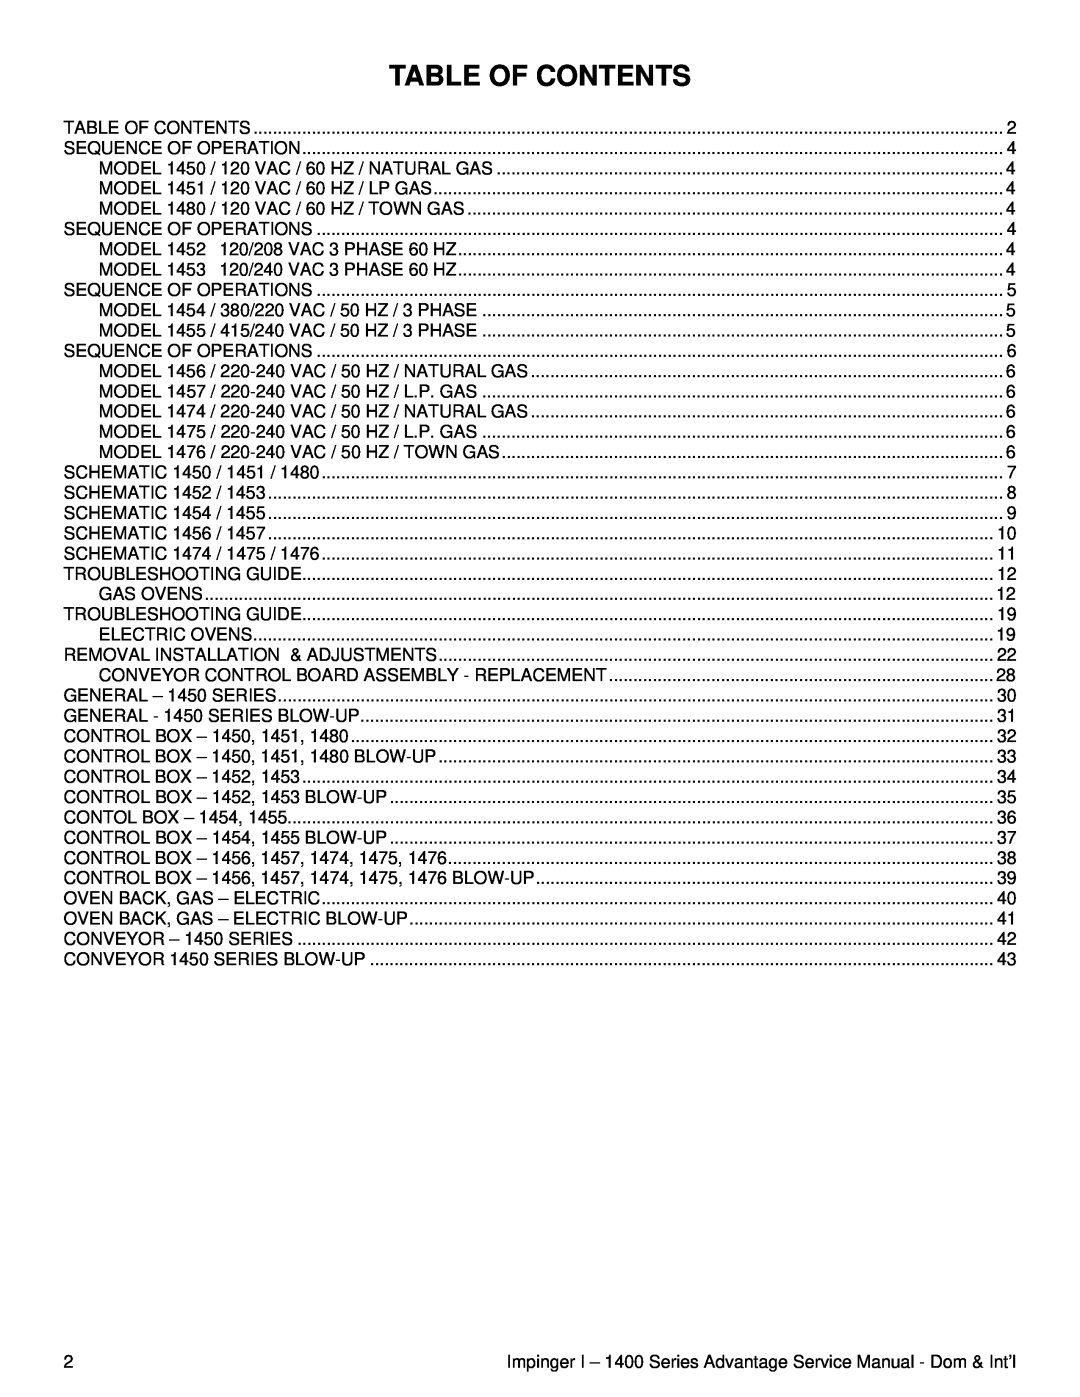 Lincoln service manual Table Of Contents, Impinger I - 1400 Series Advantage Service Manual - Dom & Int’l 